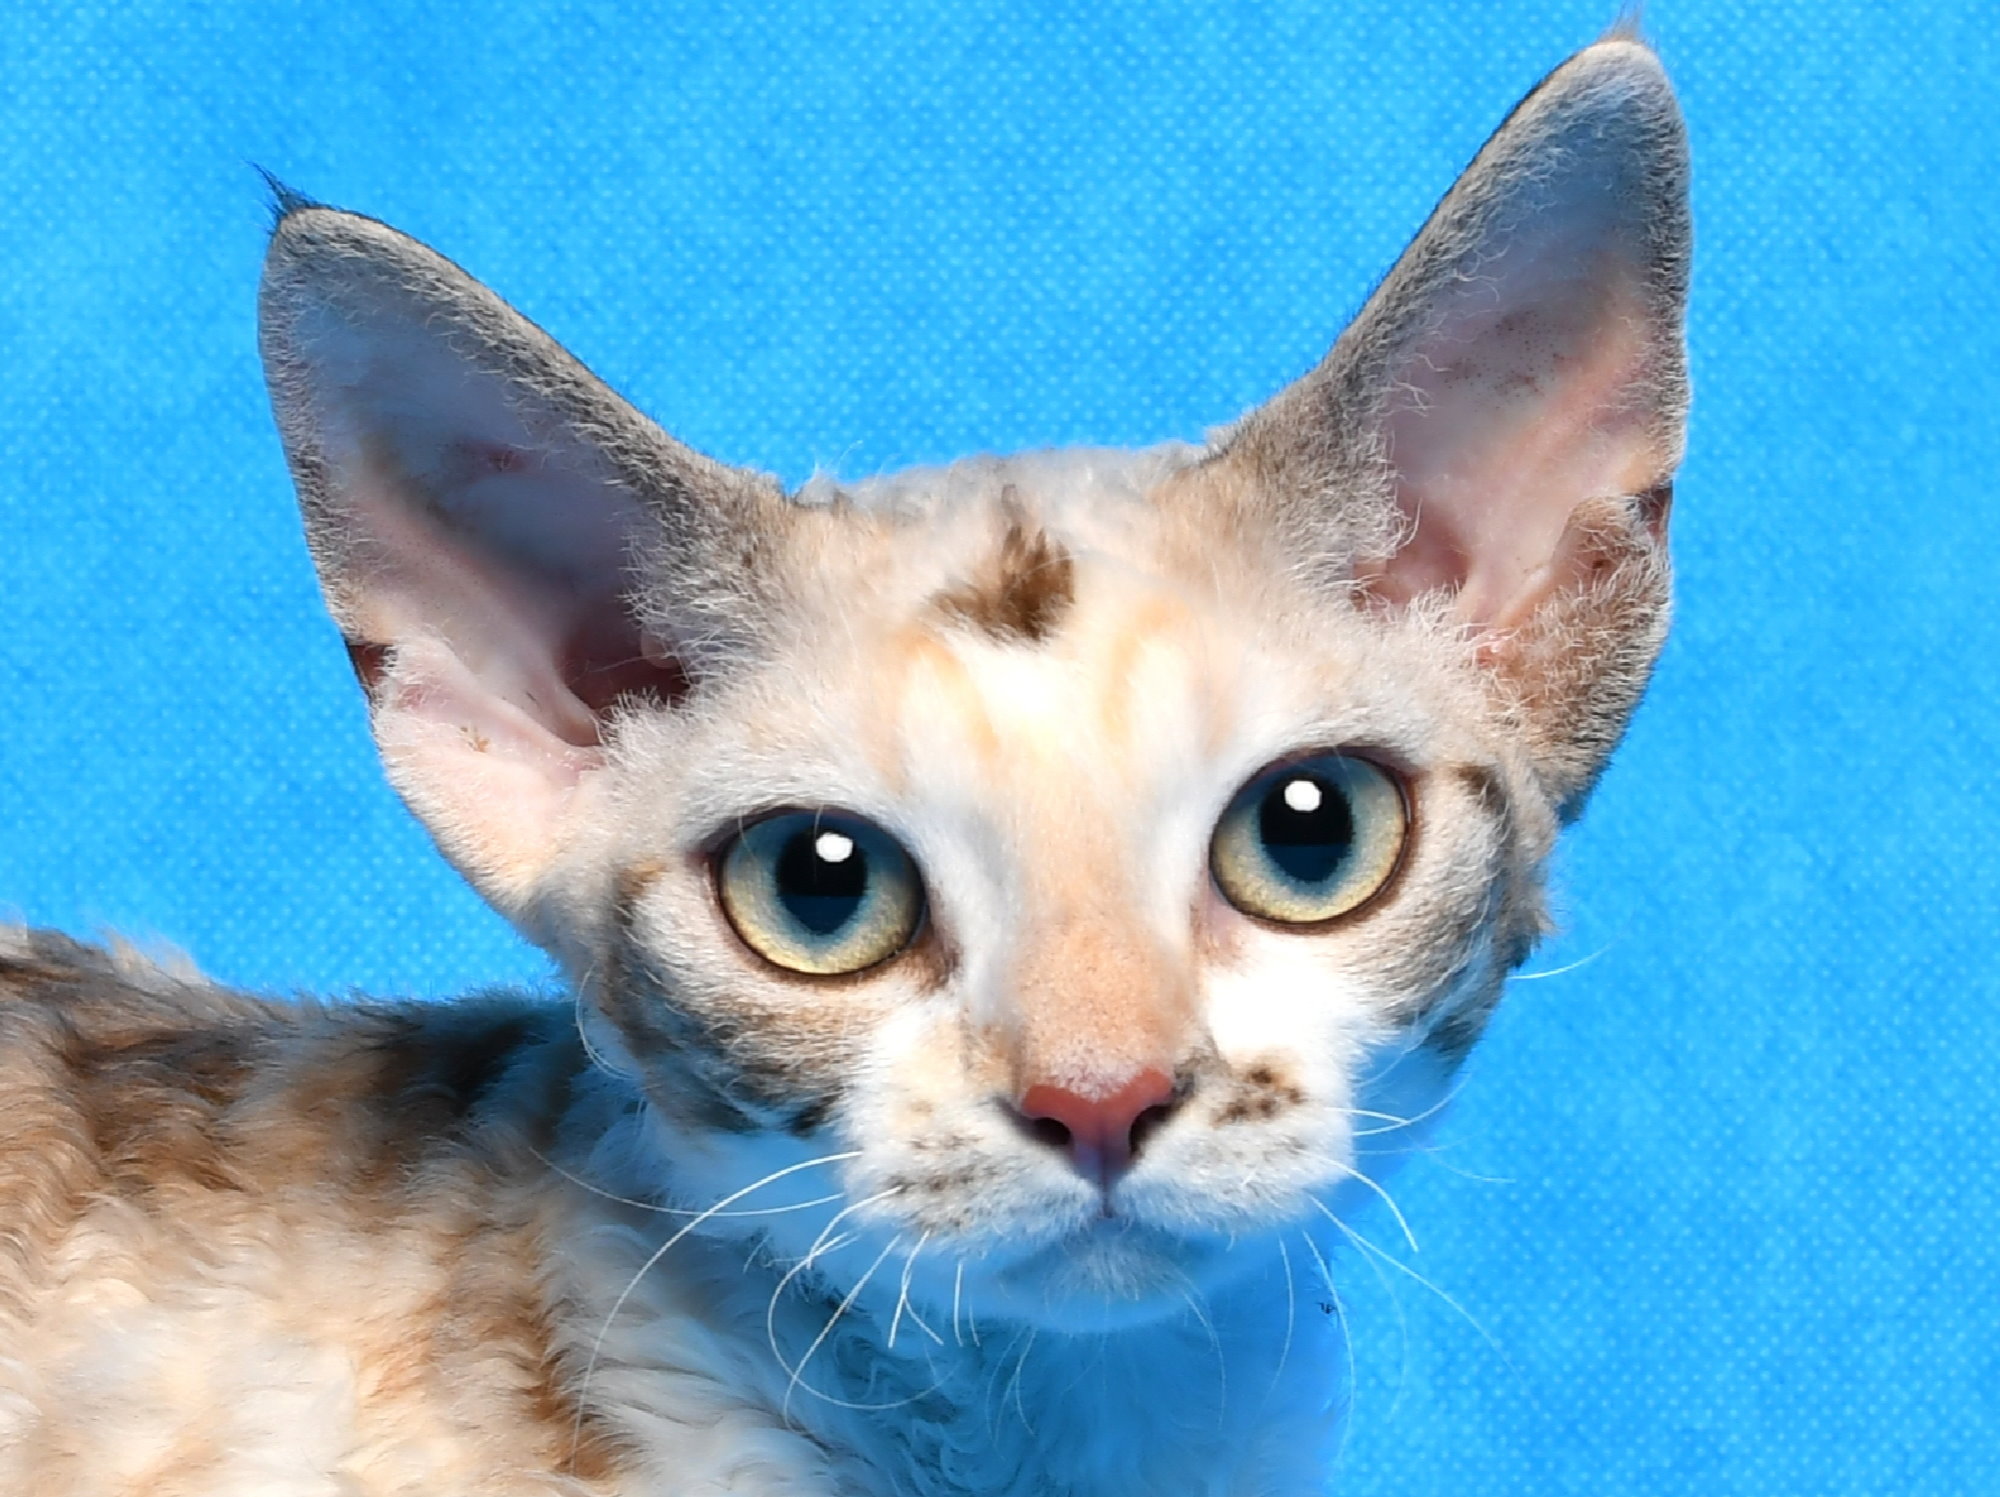 SandSilk Patricia,Devon Rex female Cat,Seal Silver Torbie Mink with White.More information and pictures